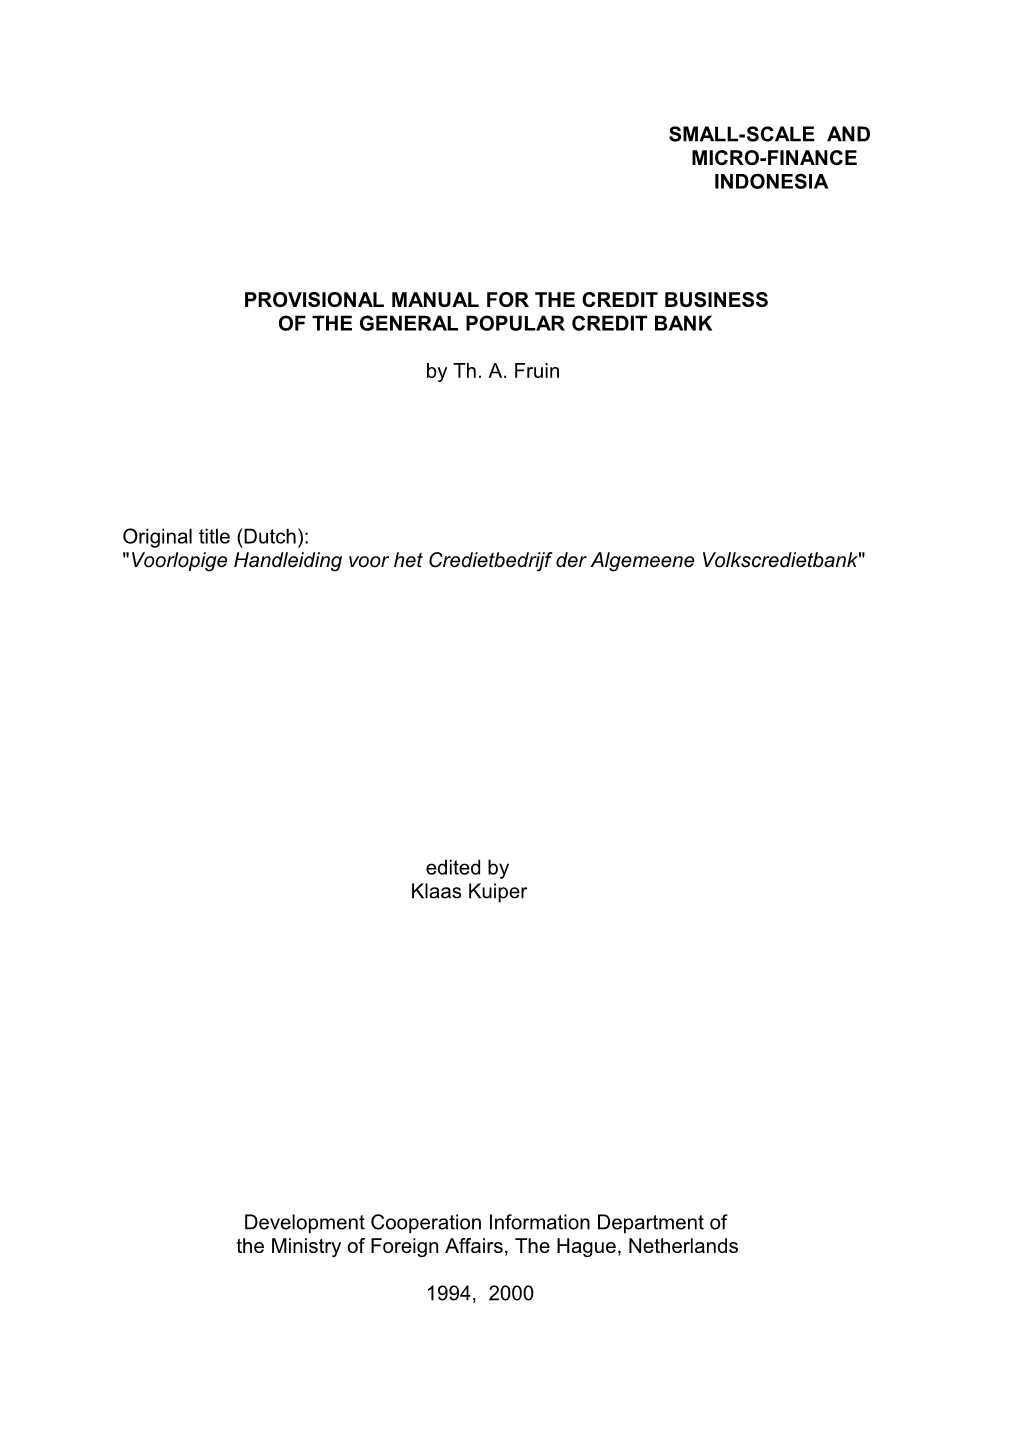 Provisional Manual for the Credit Business